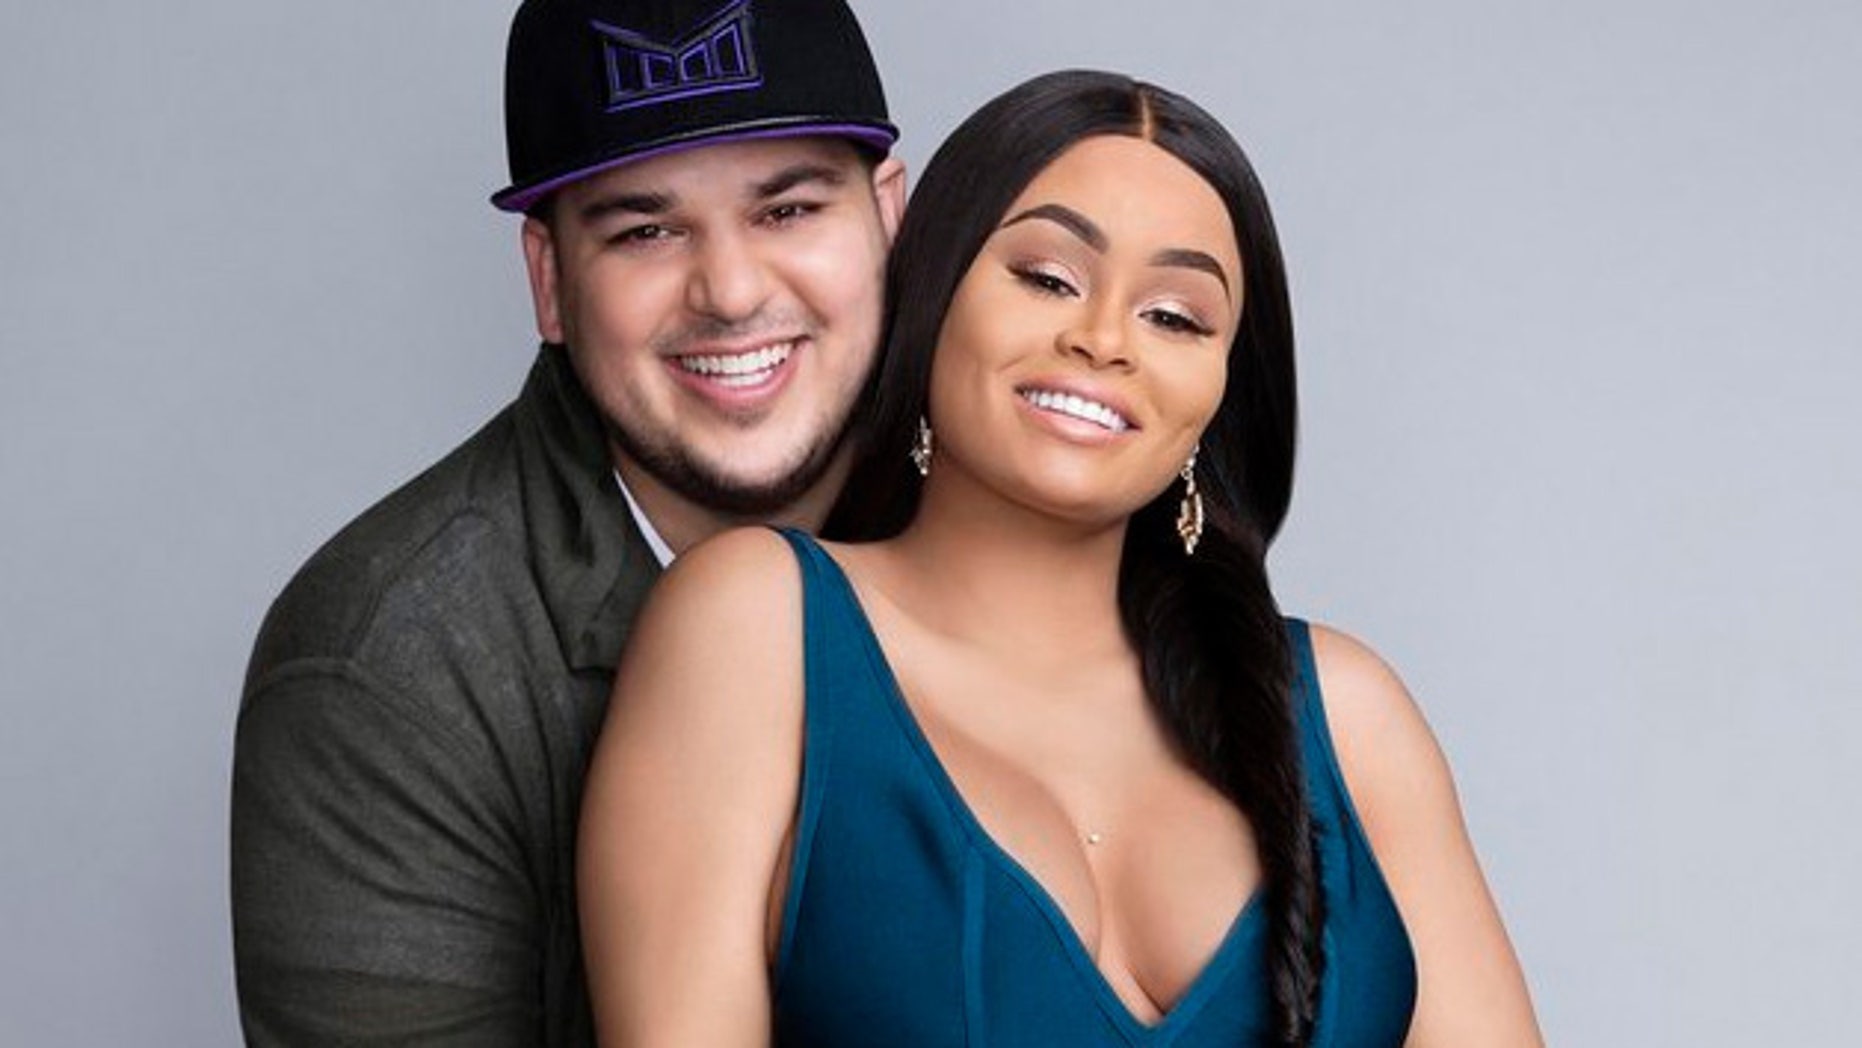 Who has blac chyna dating